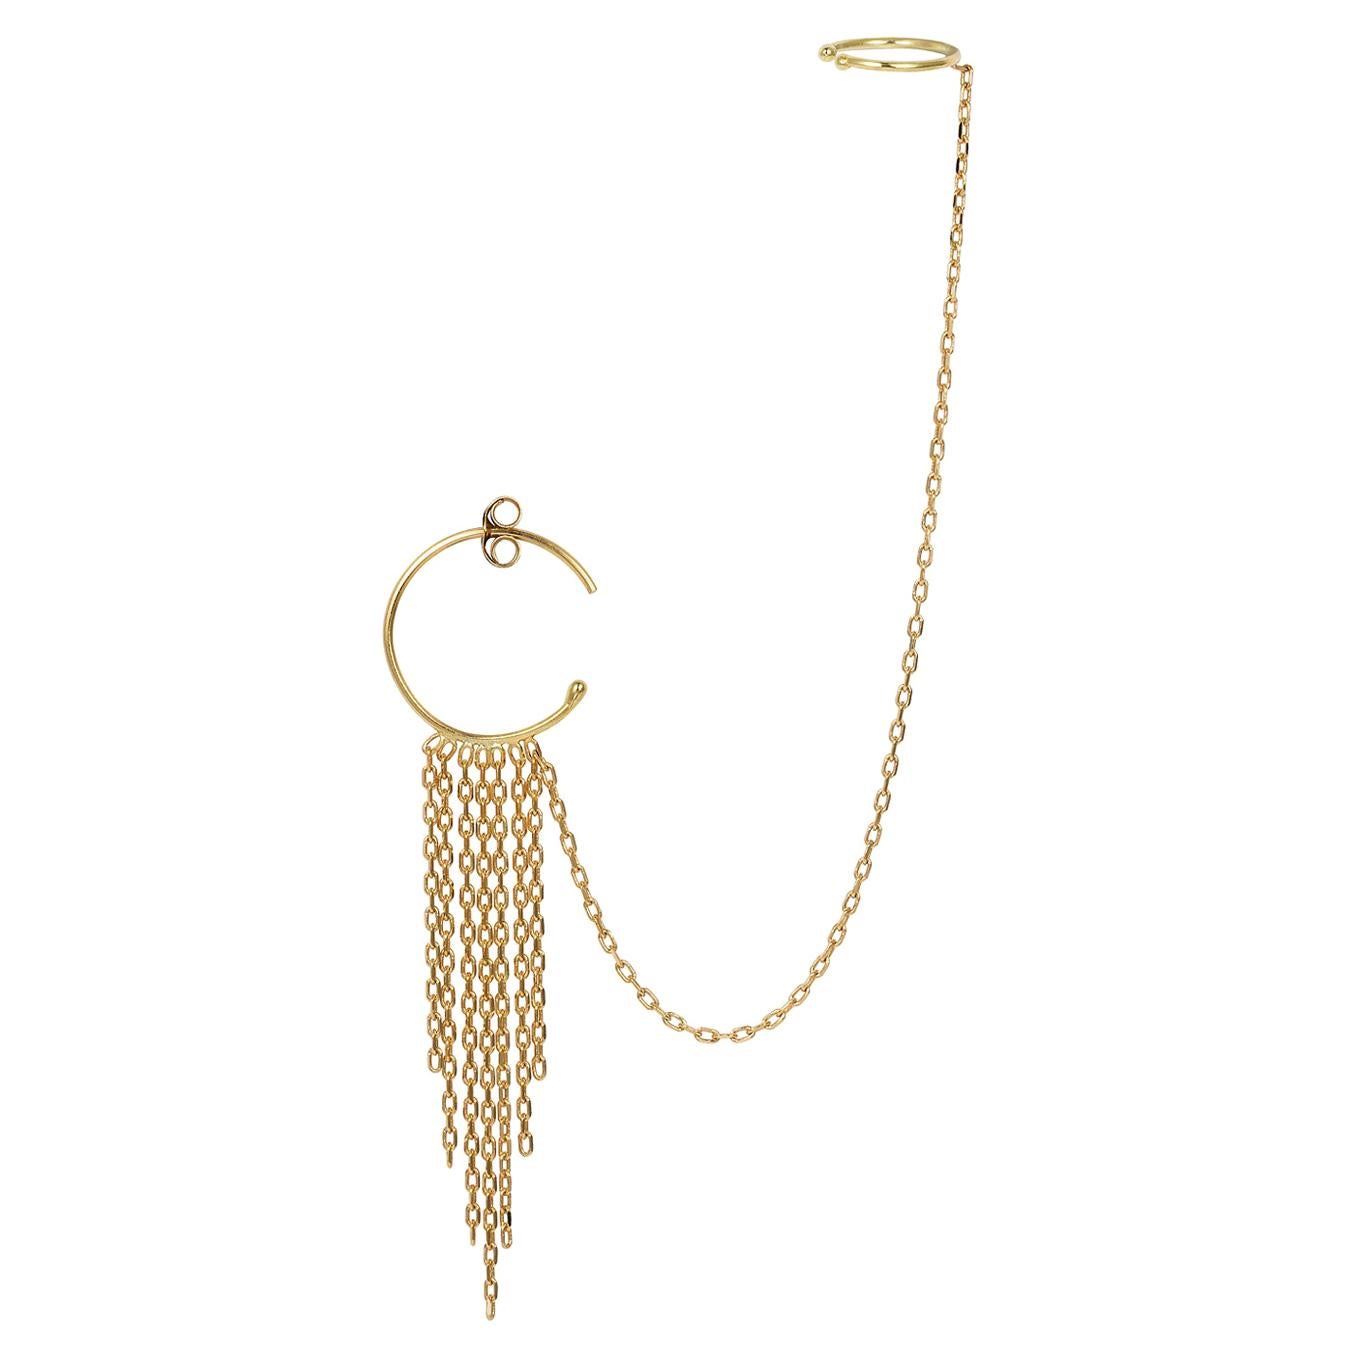 Sweet Pea 18 Karat Yellow Gold Small Hoop Earring with Tapered Fringe and Cuff For Sale